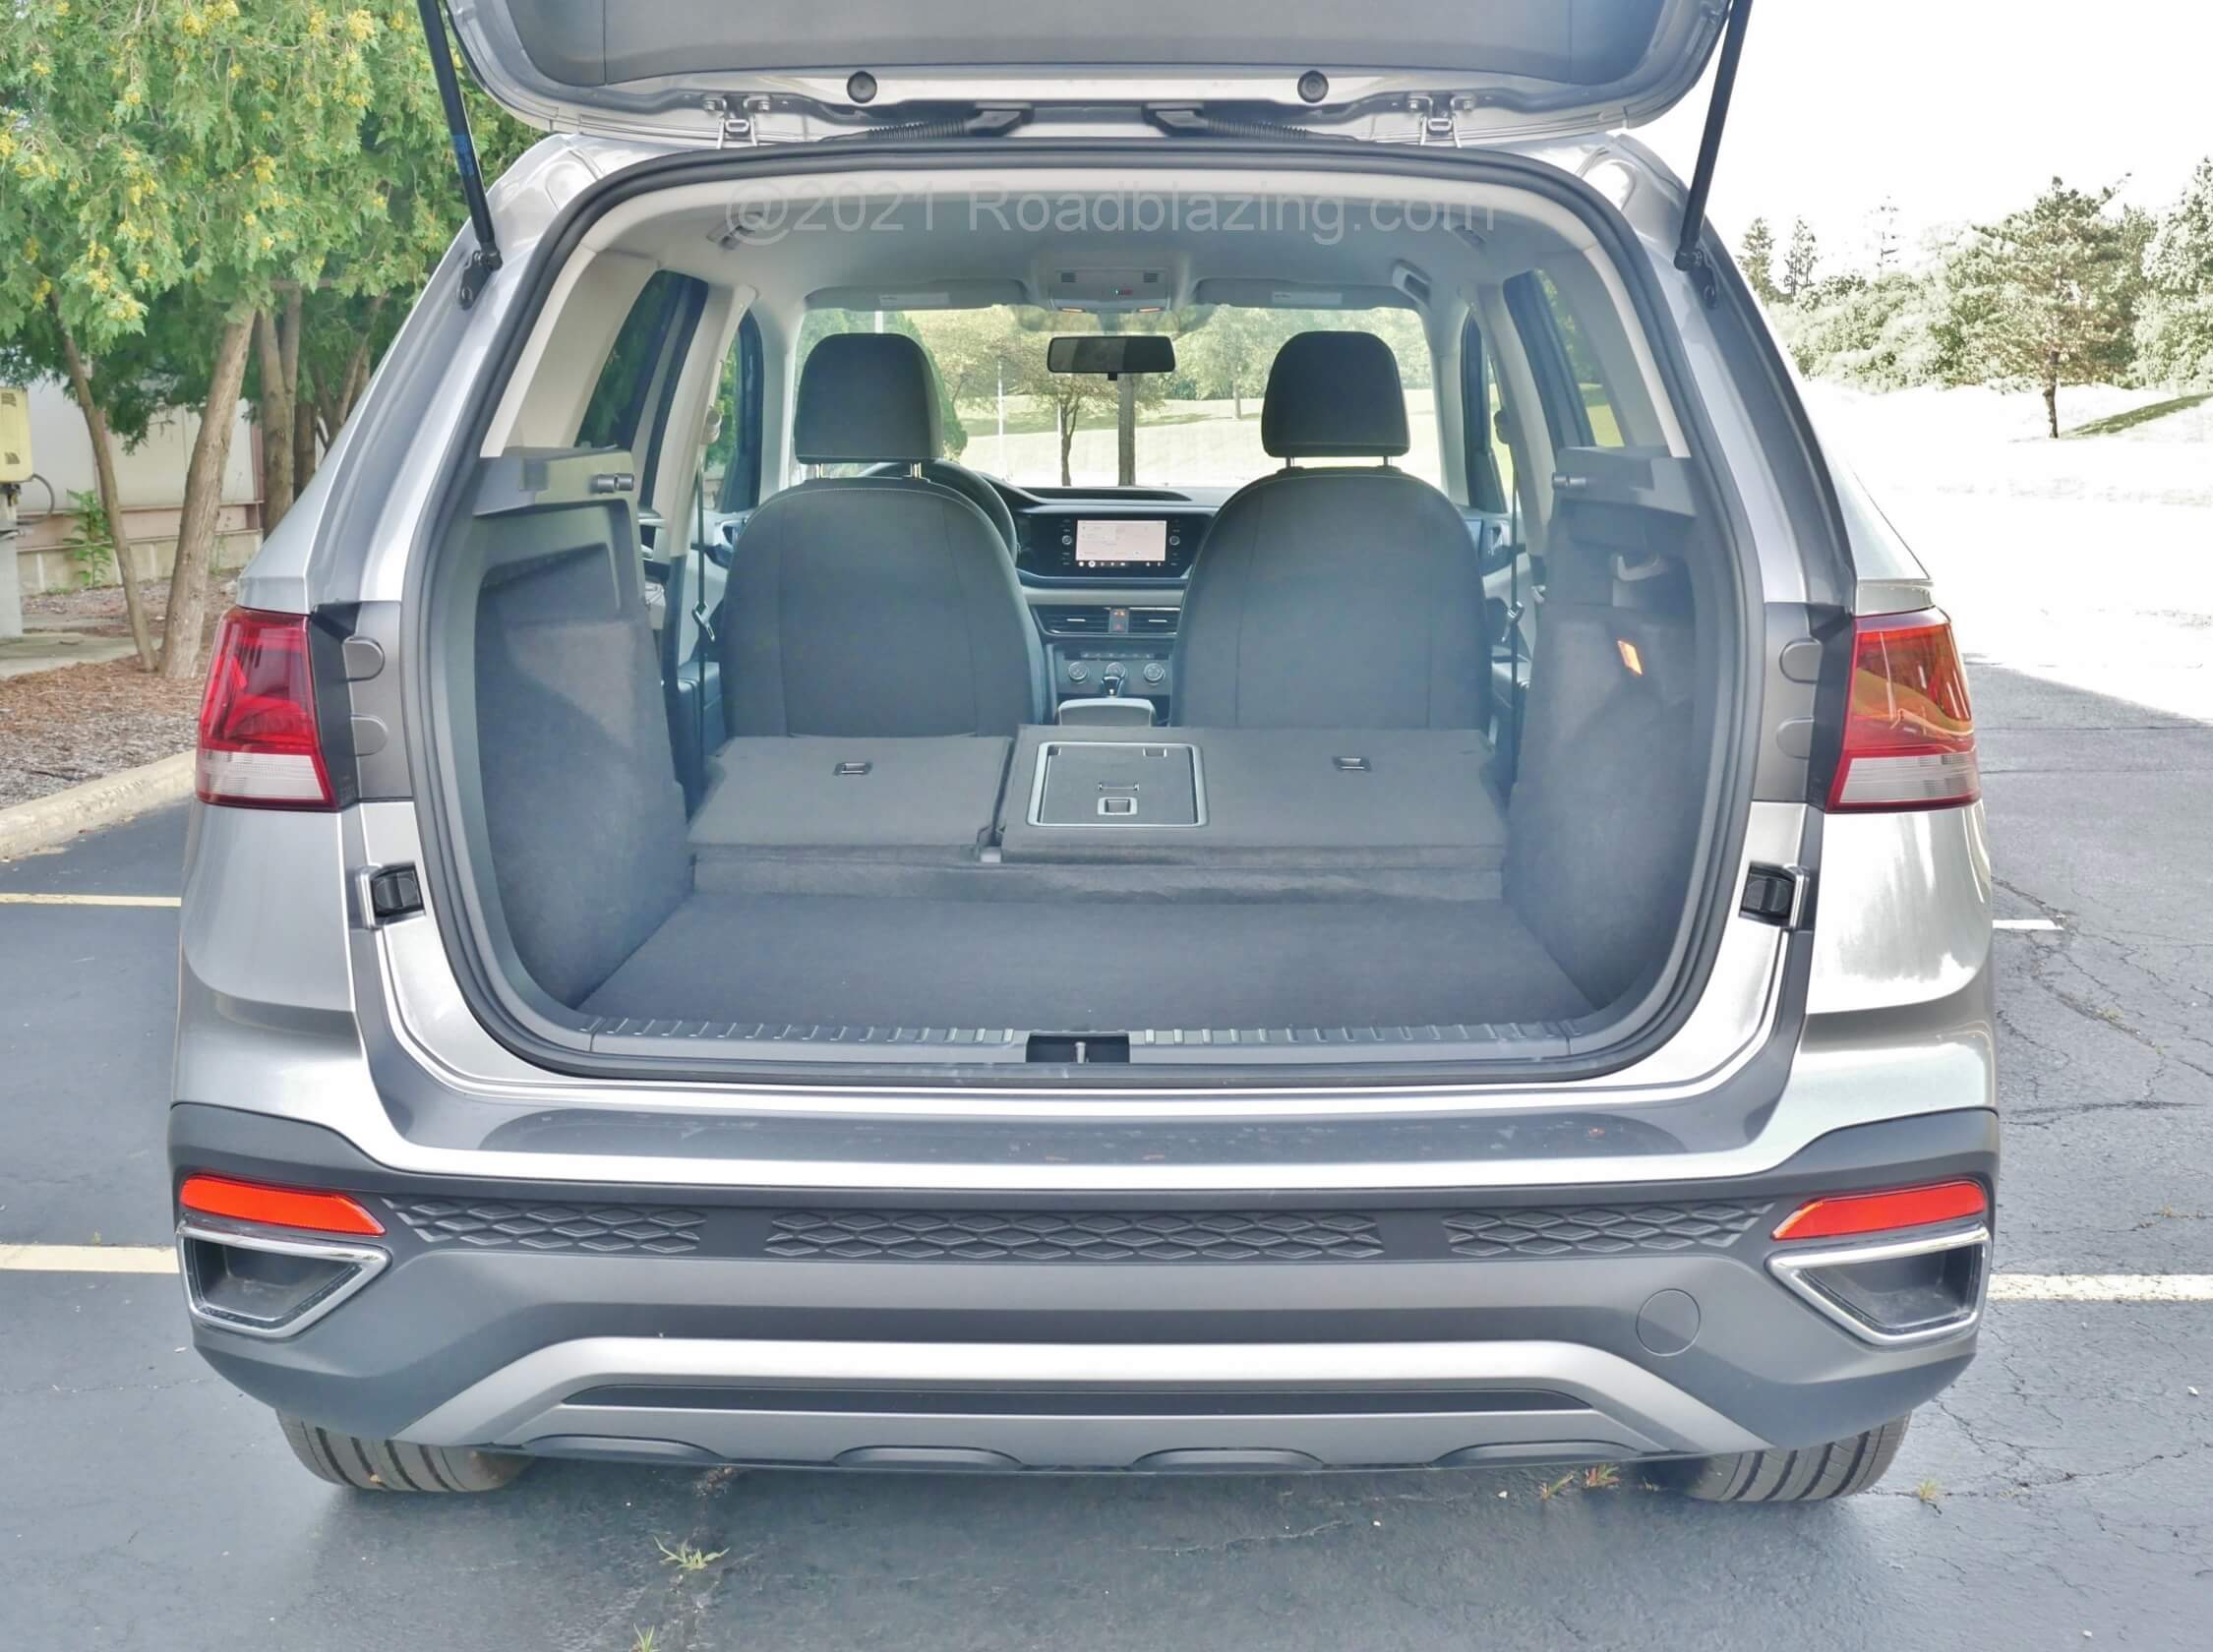 2022 Volkswagen Taos SE 4Motion: low load floor, tall opening makes this small CUV more useful than a Golf.